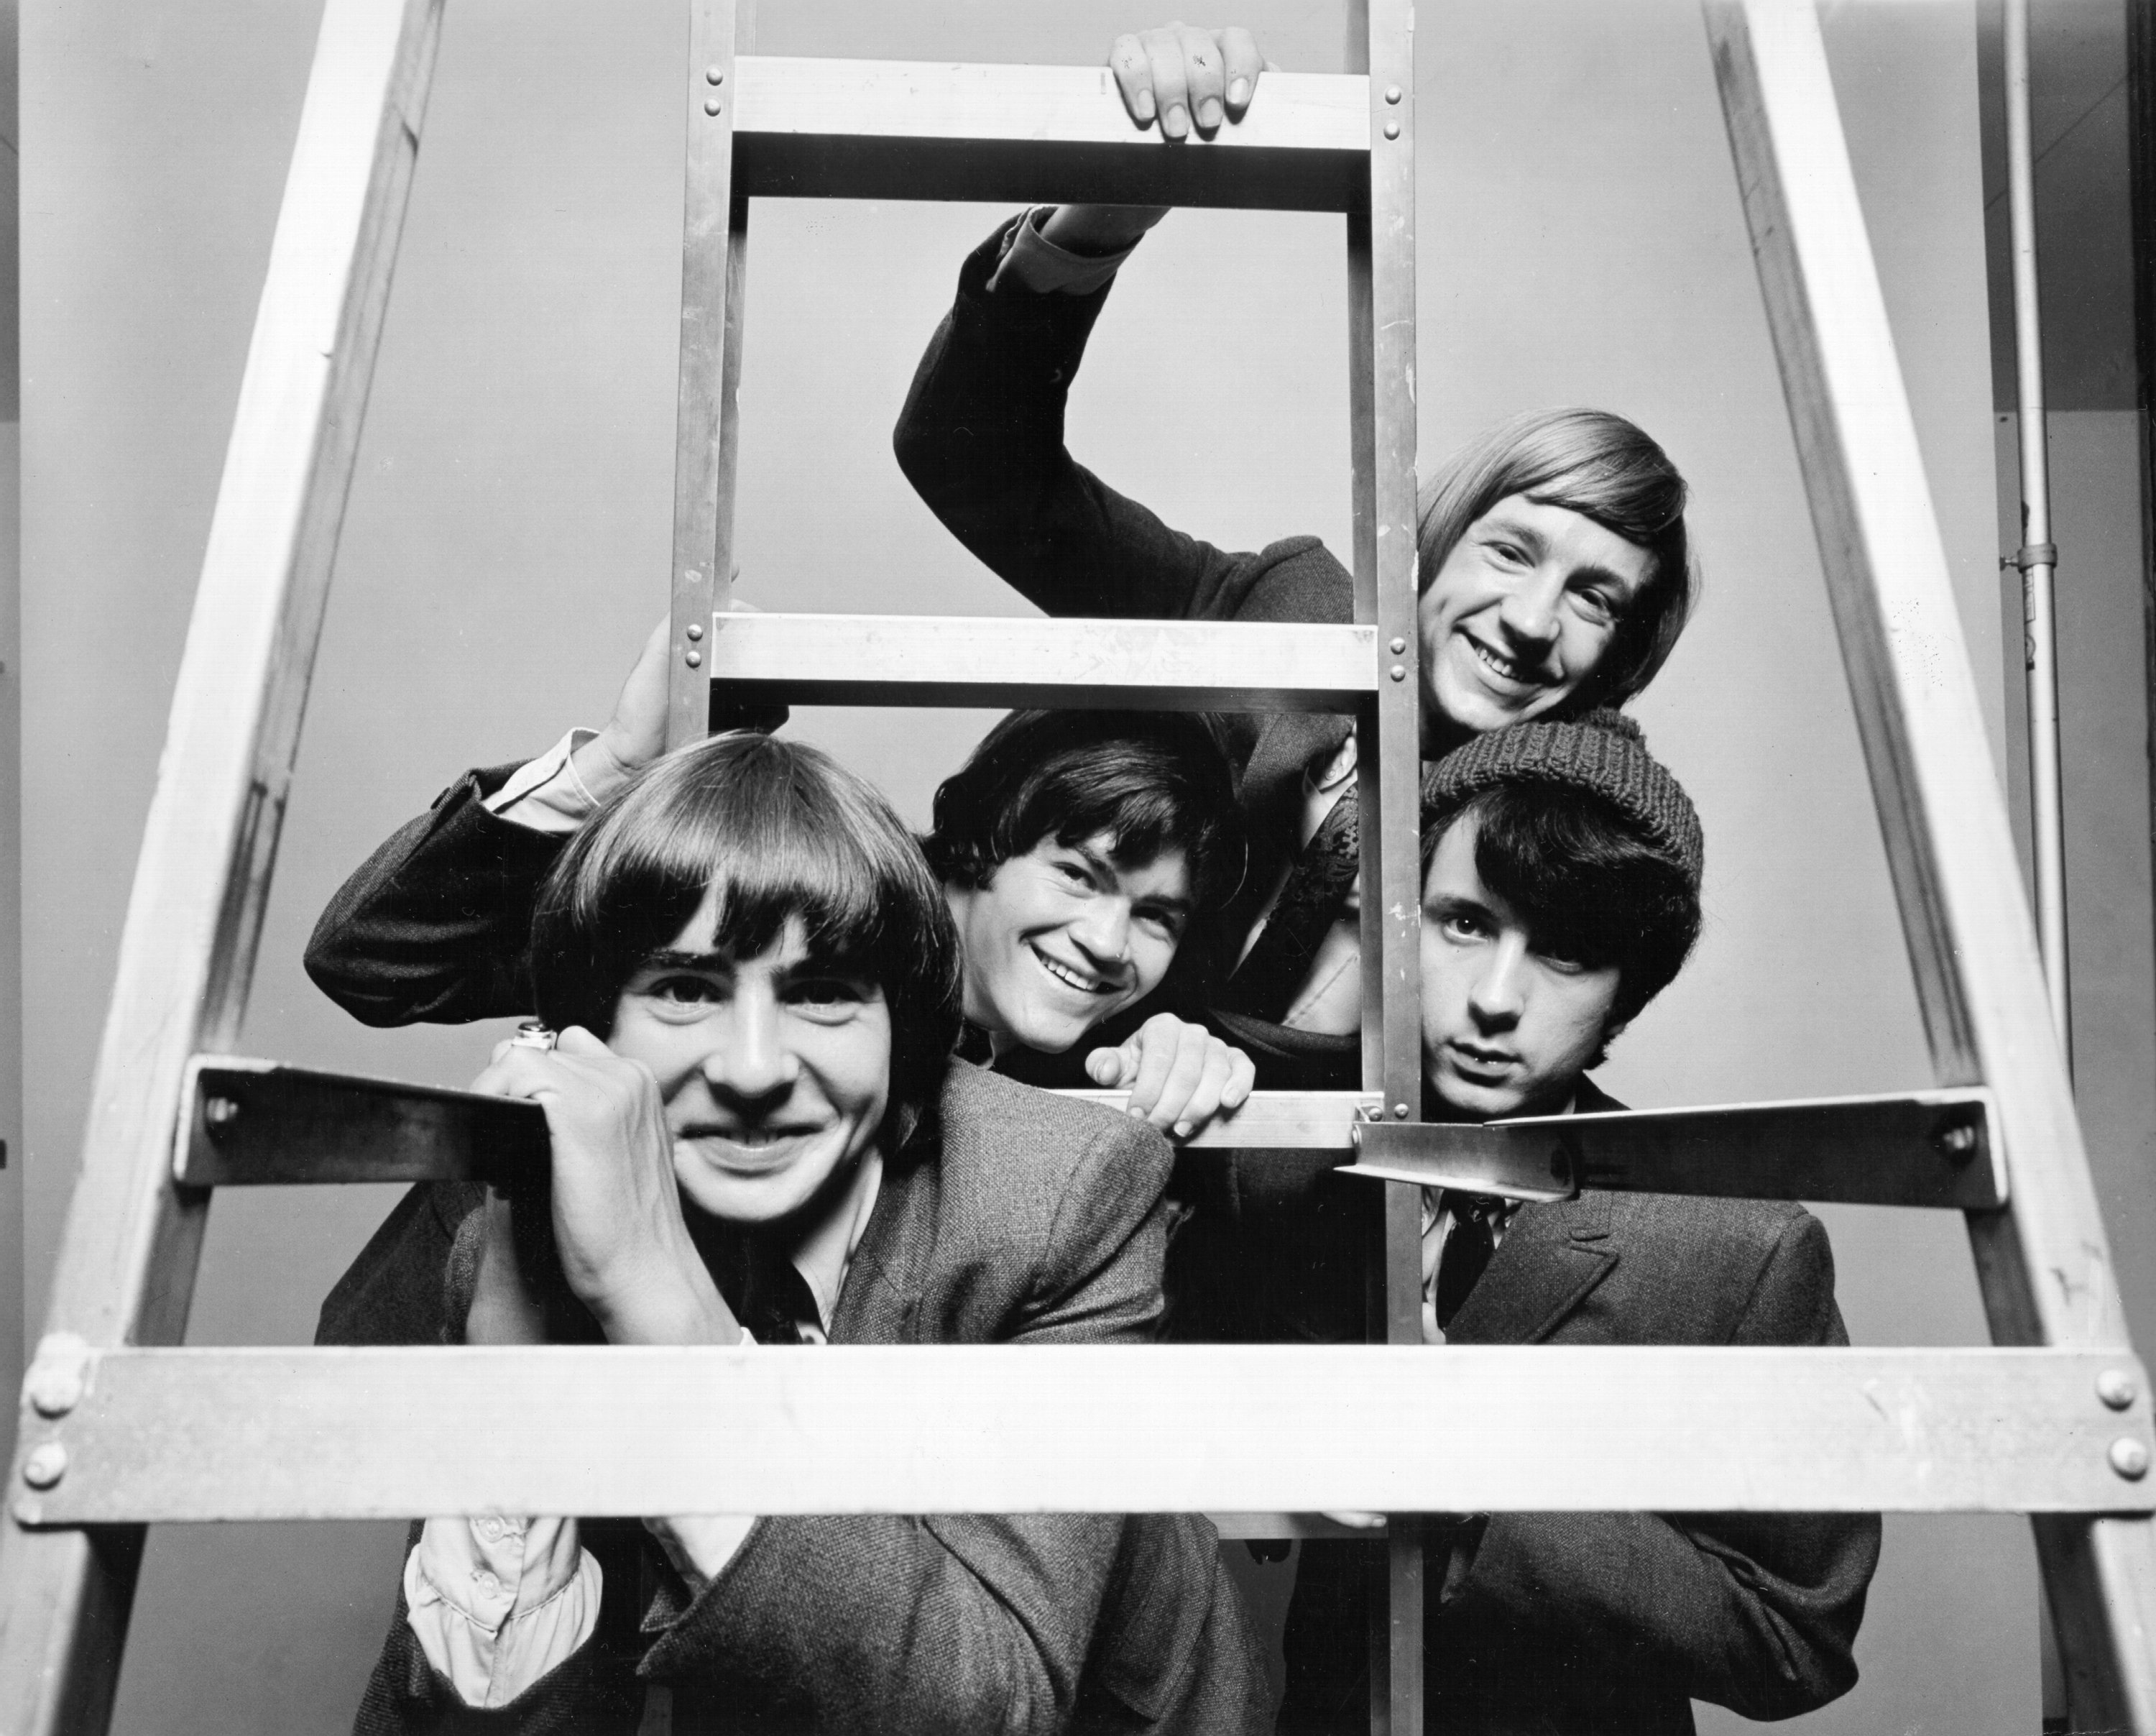 Why The Monkees Made $400 a Week While Their Albums Sold Millions